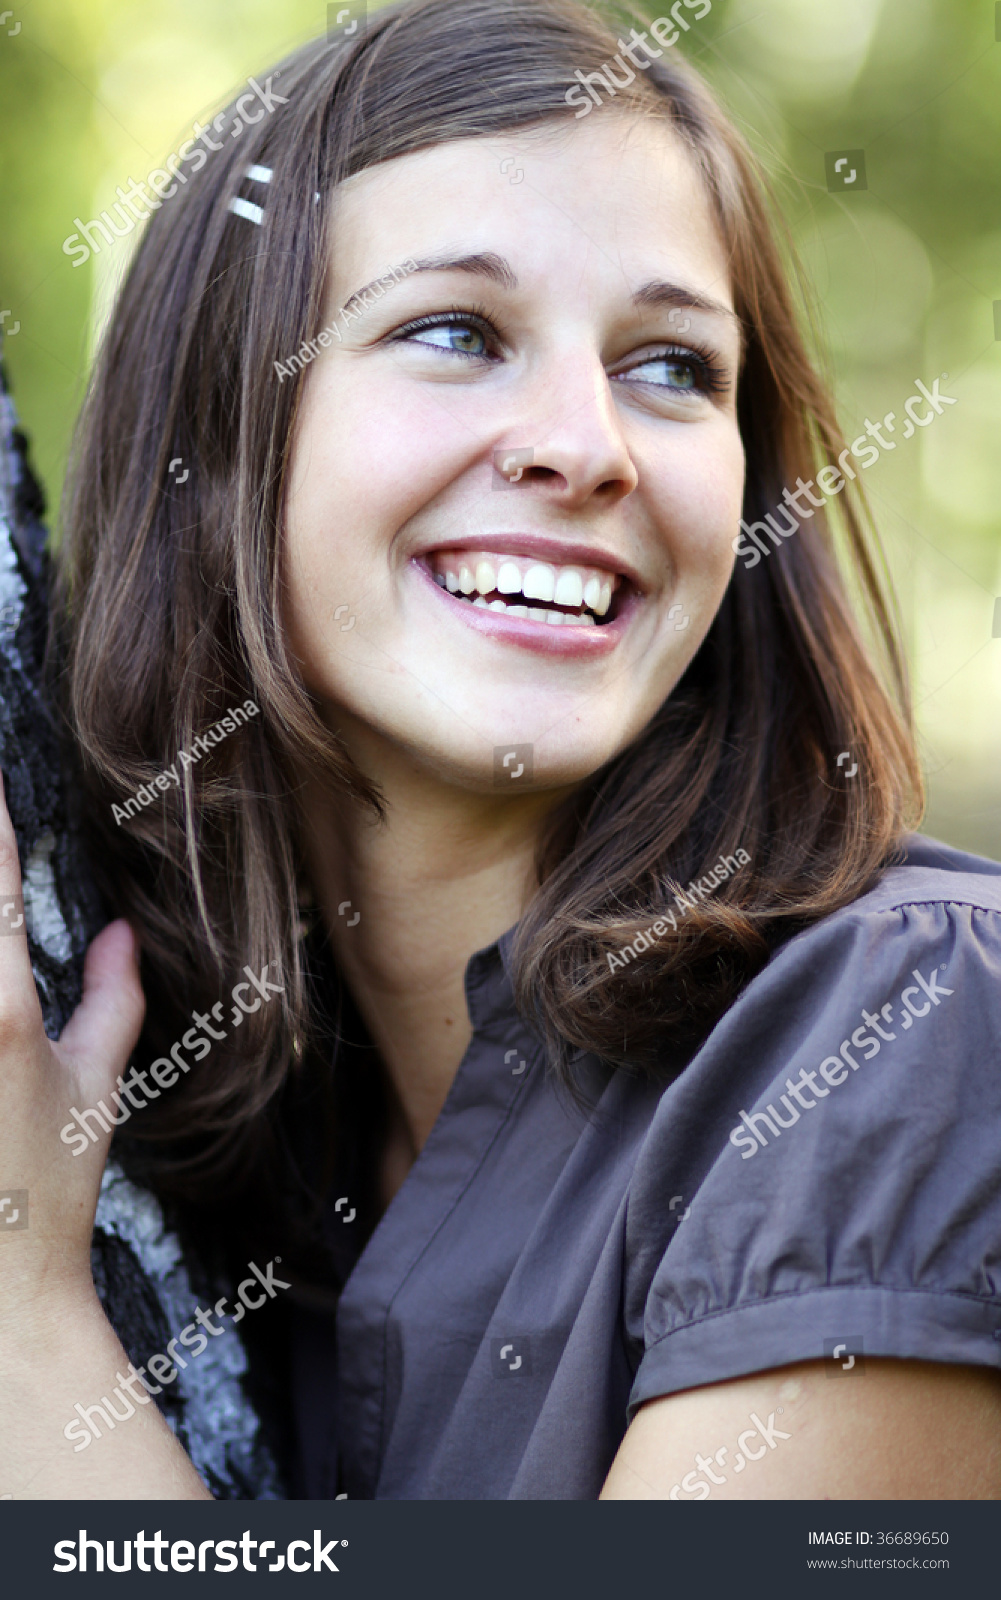 Russian Beauty - The Happy Girl At A White Birch Stock Photo 36689650 ...